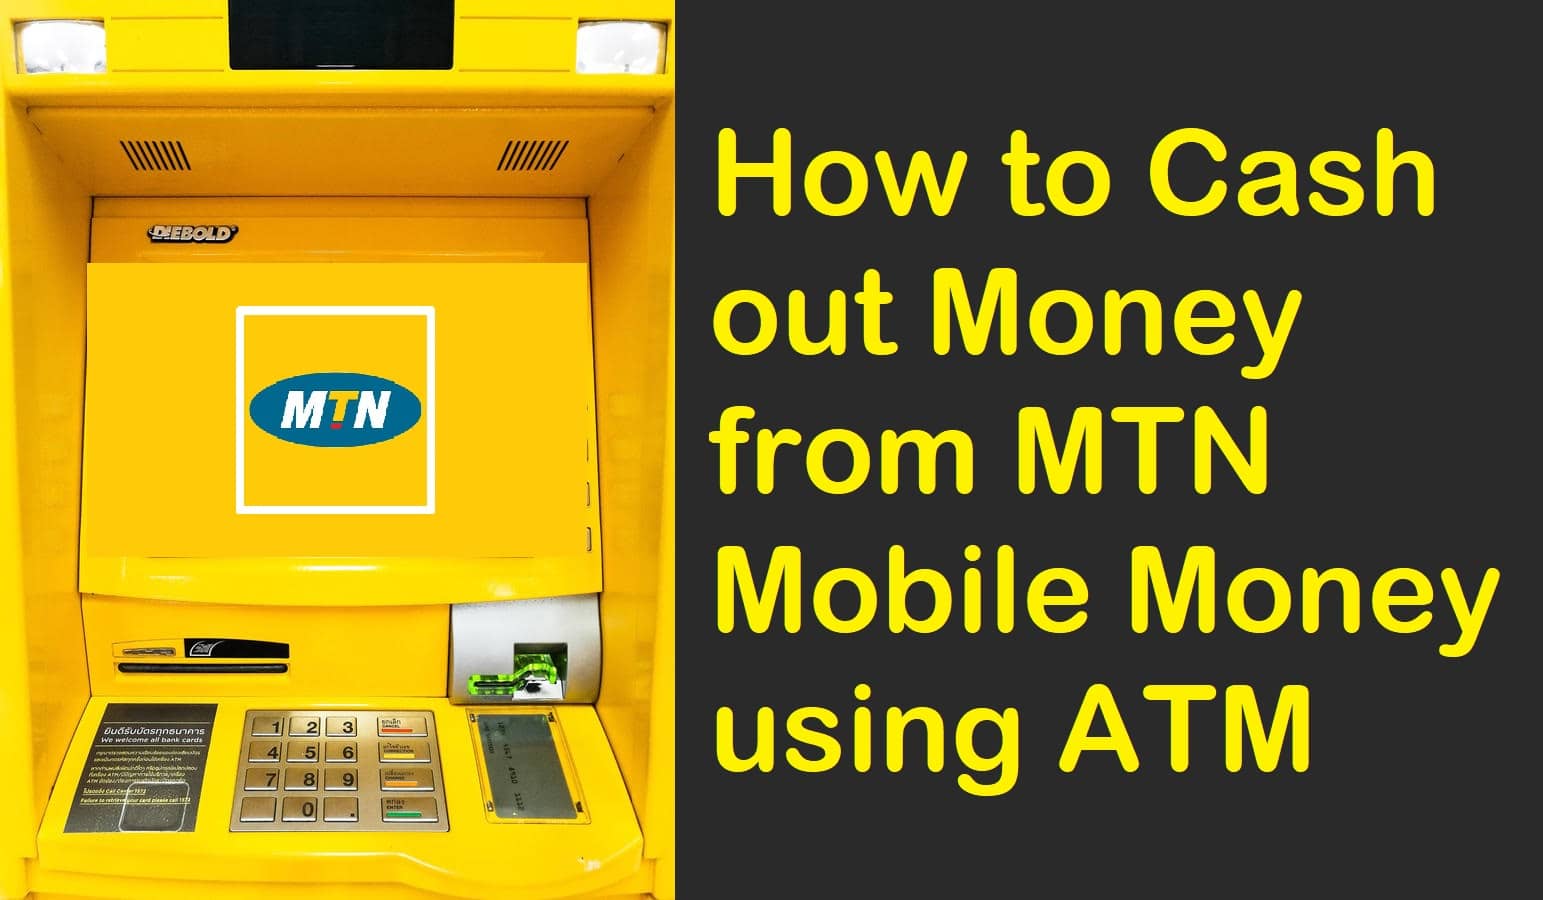 How to Cash out Money from MTN Mobile Money using ATM